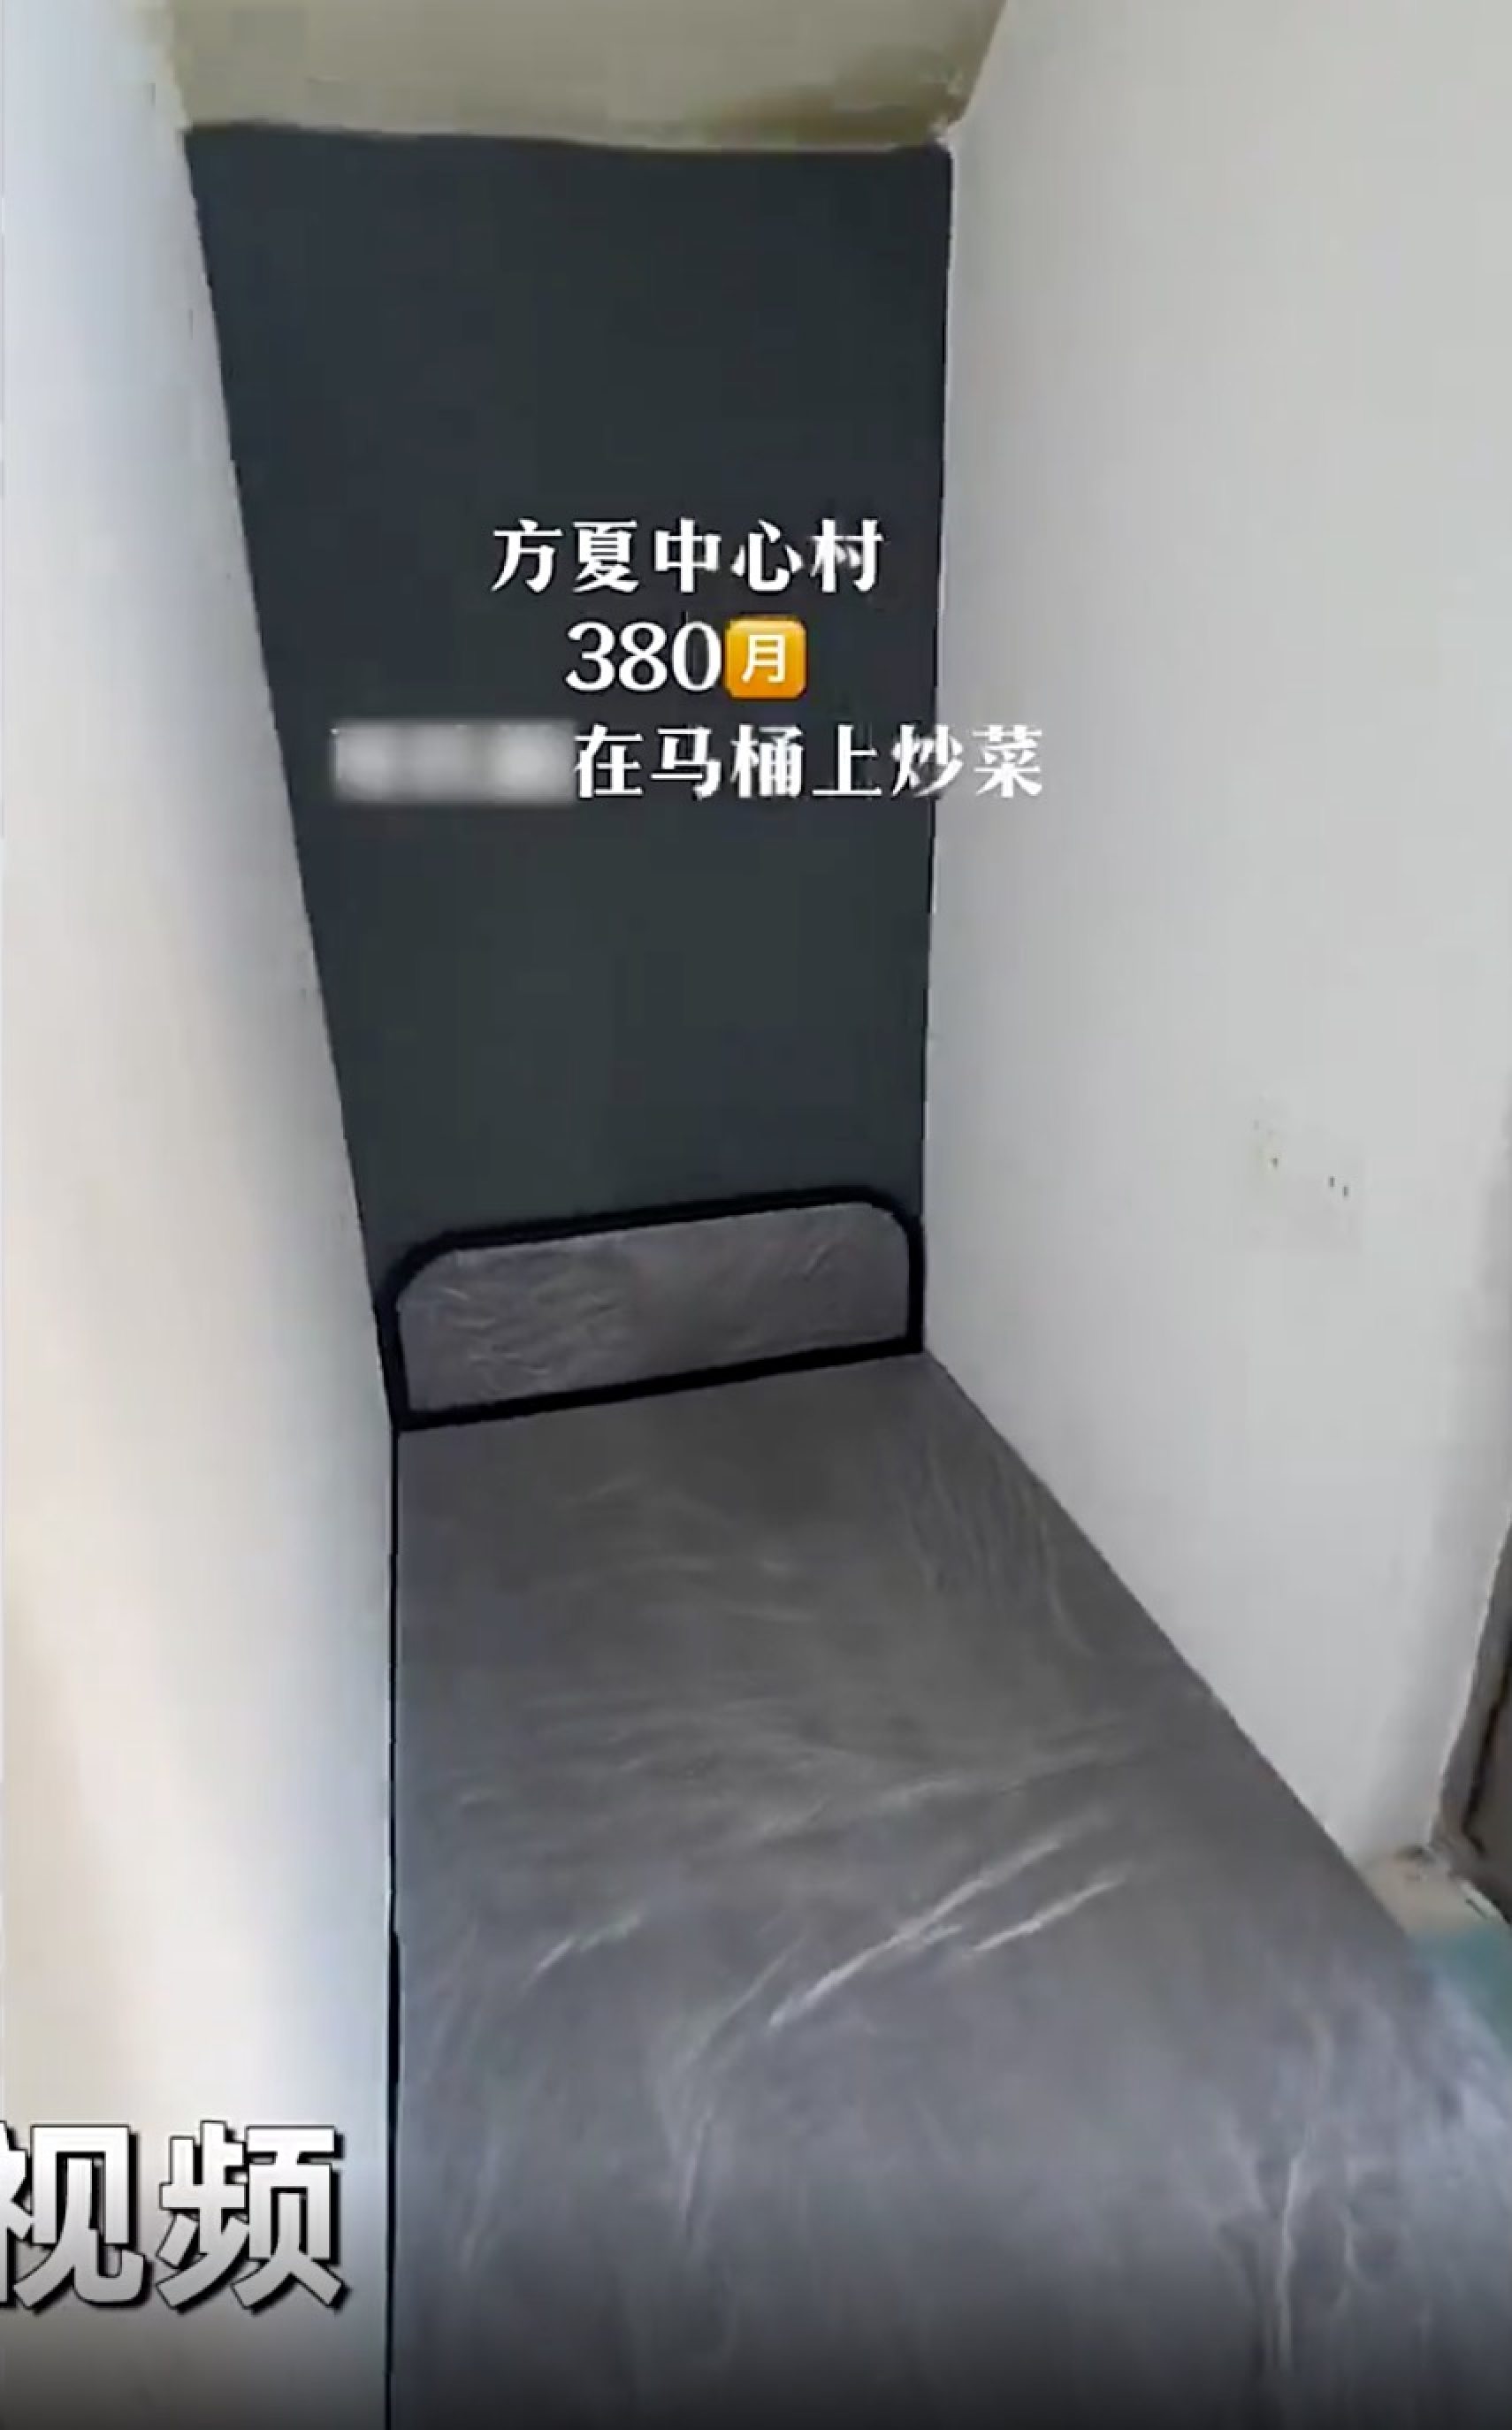 As well as the toilet-cum-cooking arrangement, the tiny living space provides a single bed. Photo: 163.com